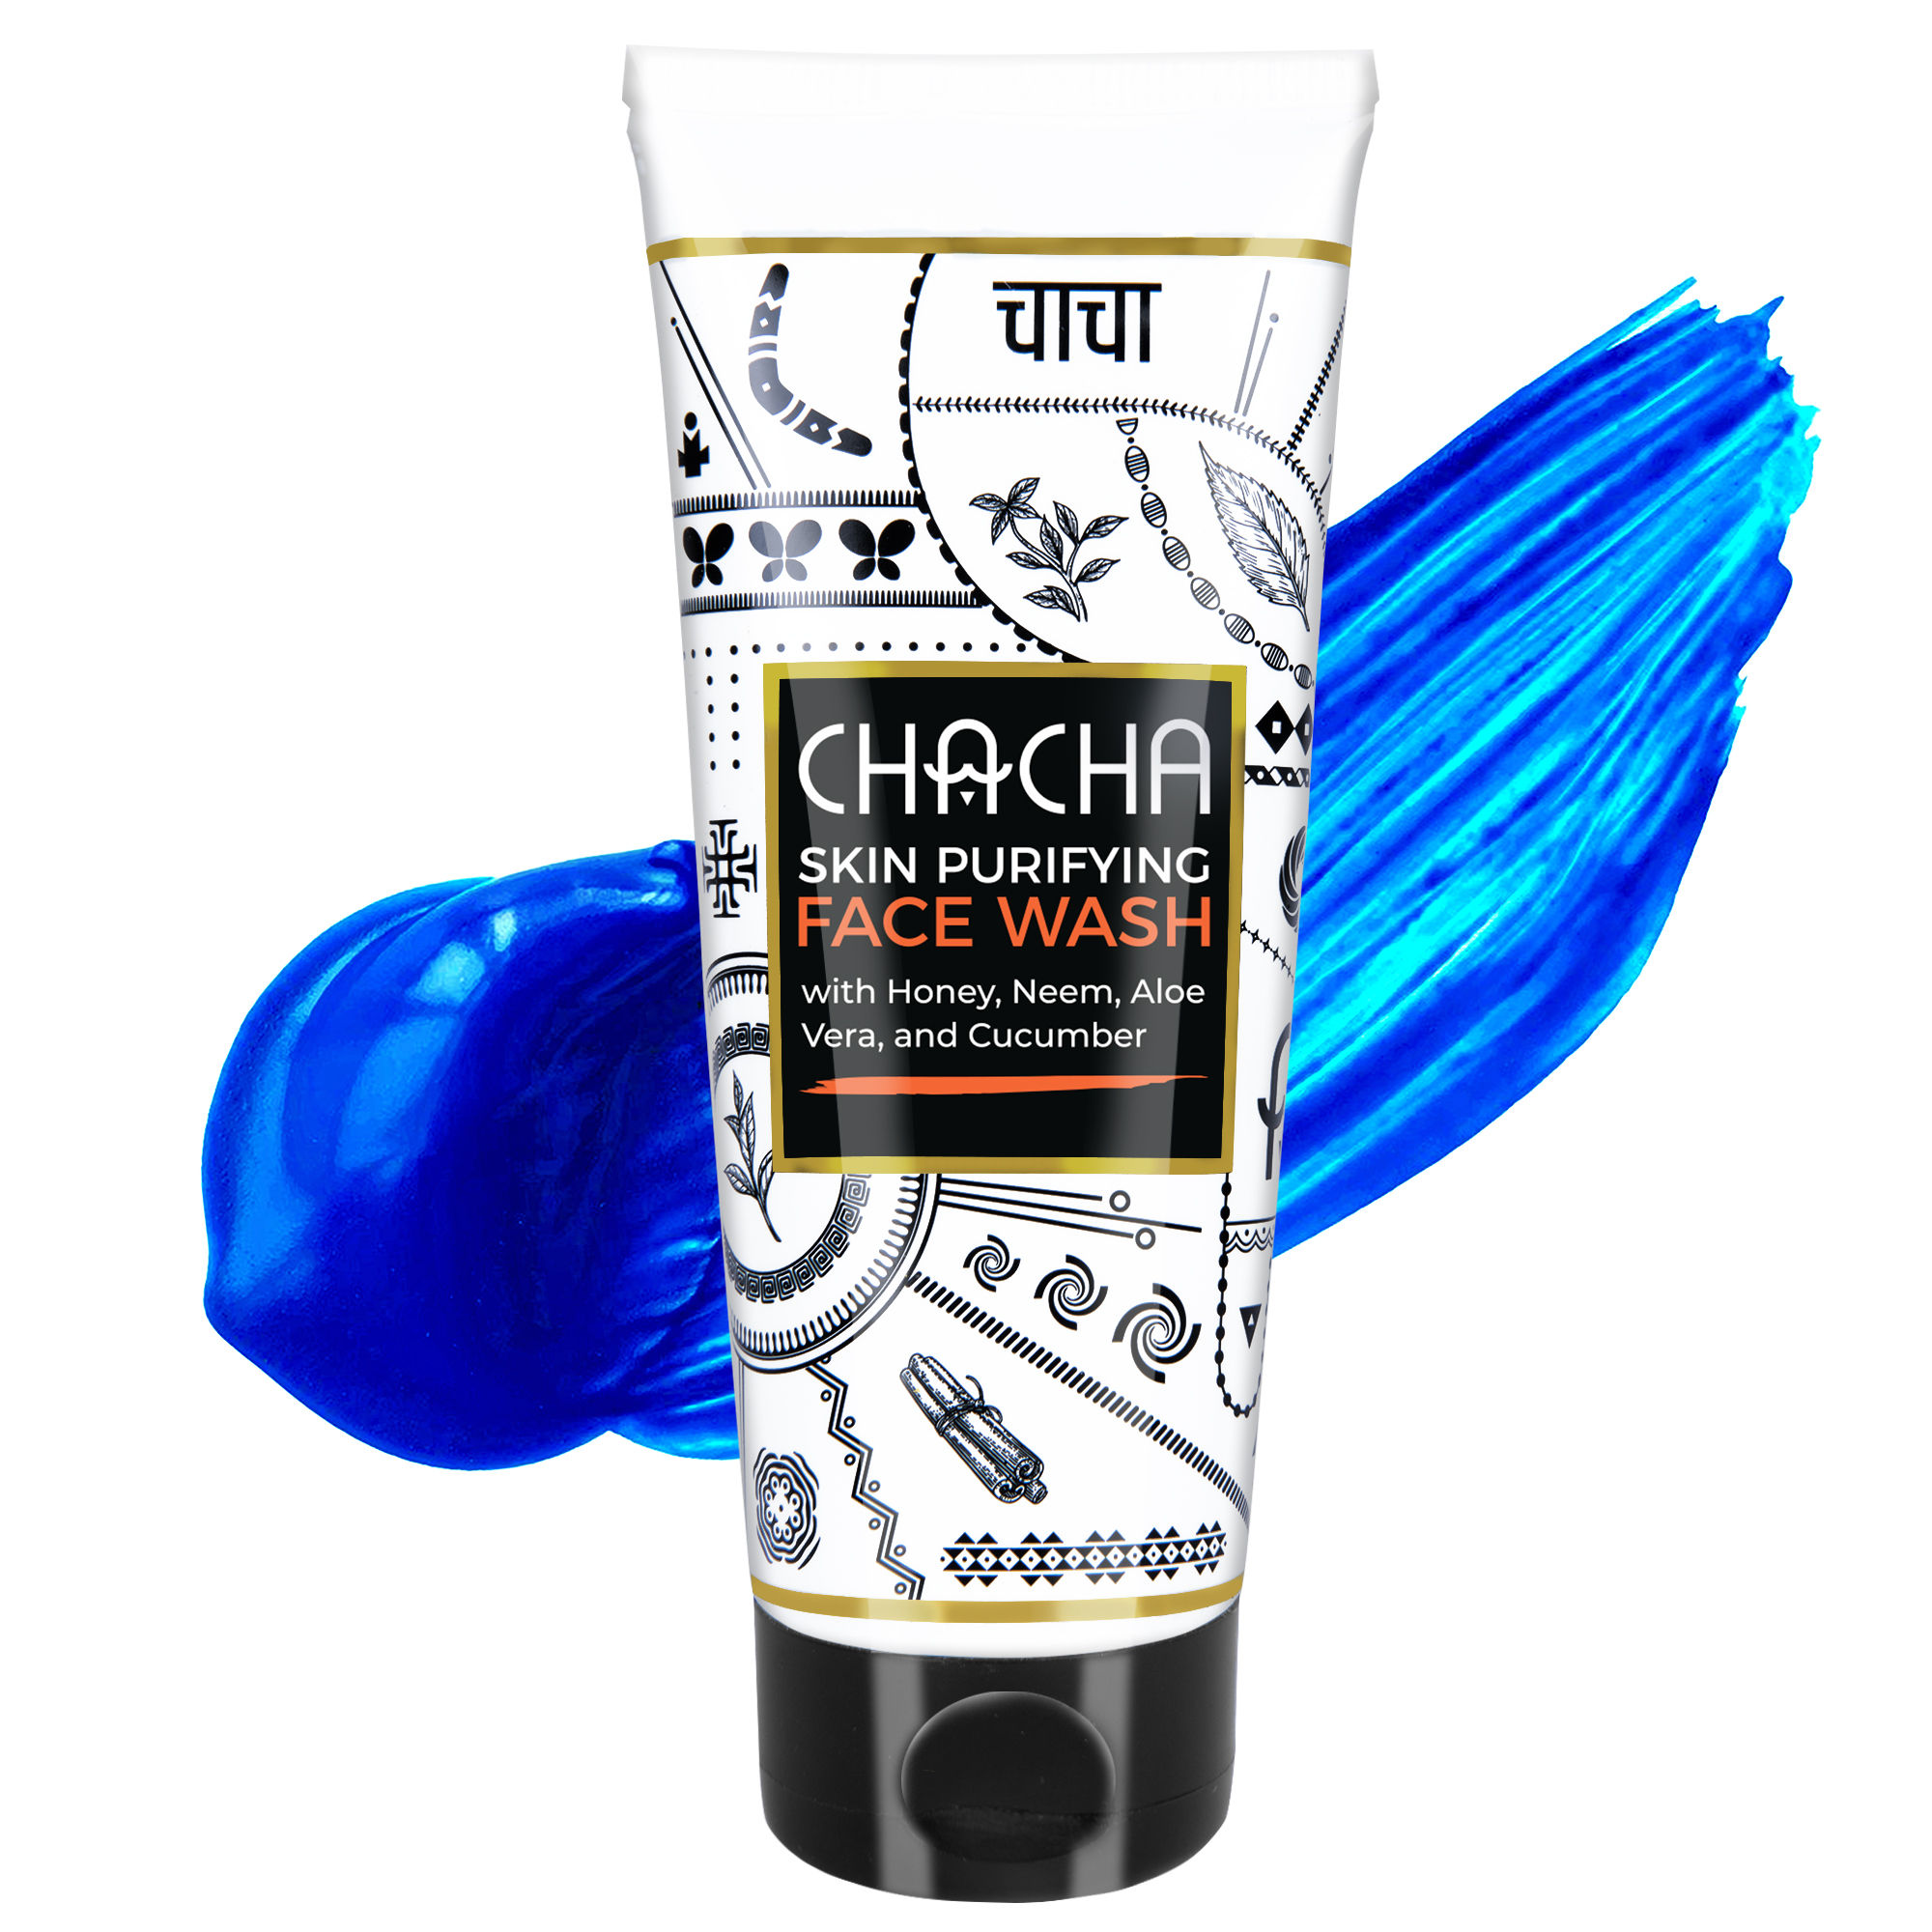 Chacha Lifestyle Skin Purifying Face Wash